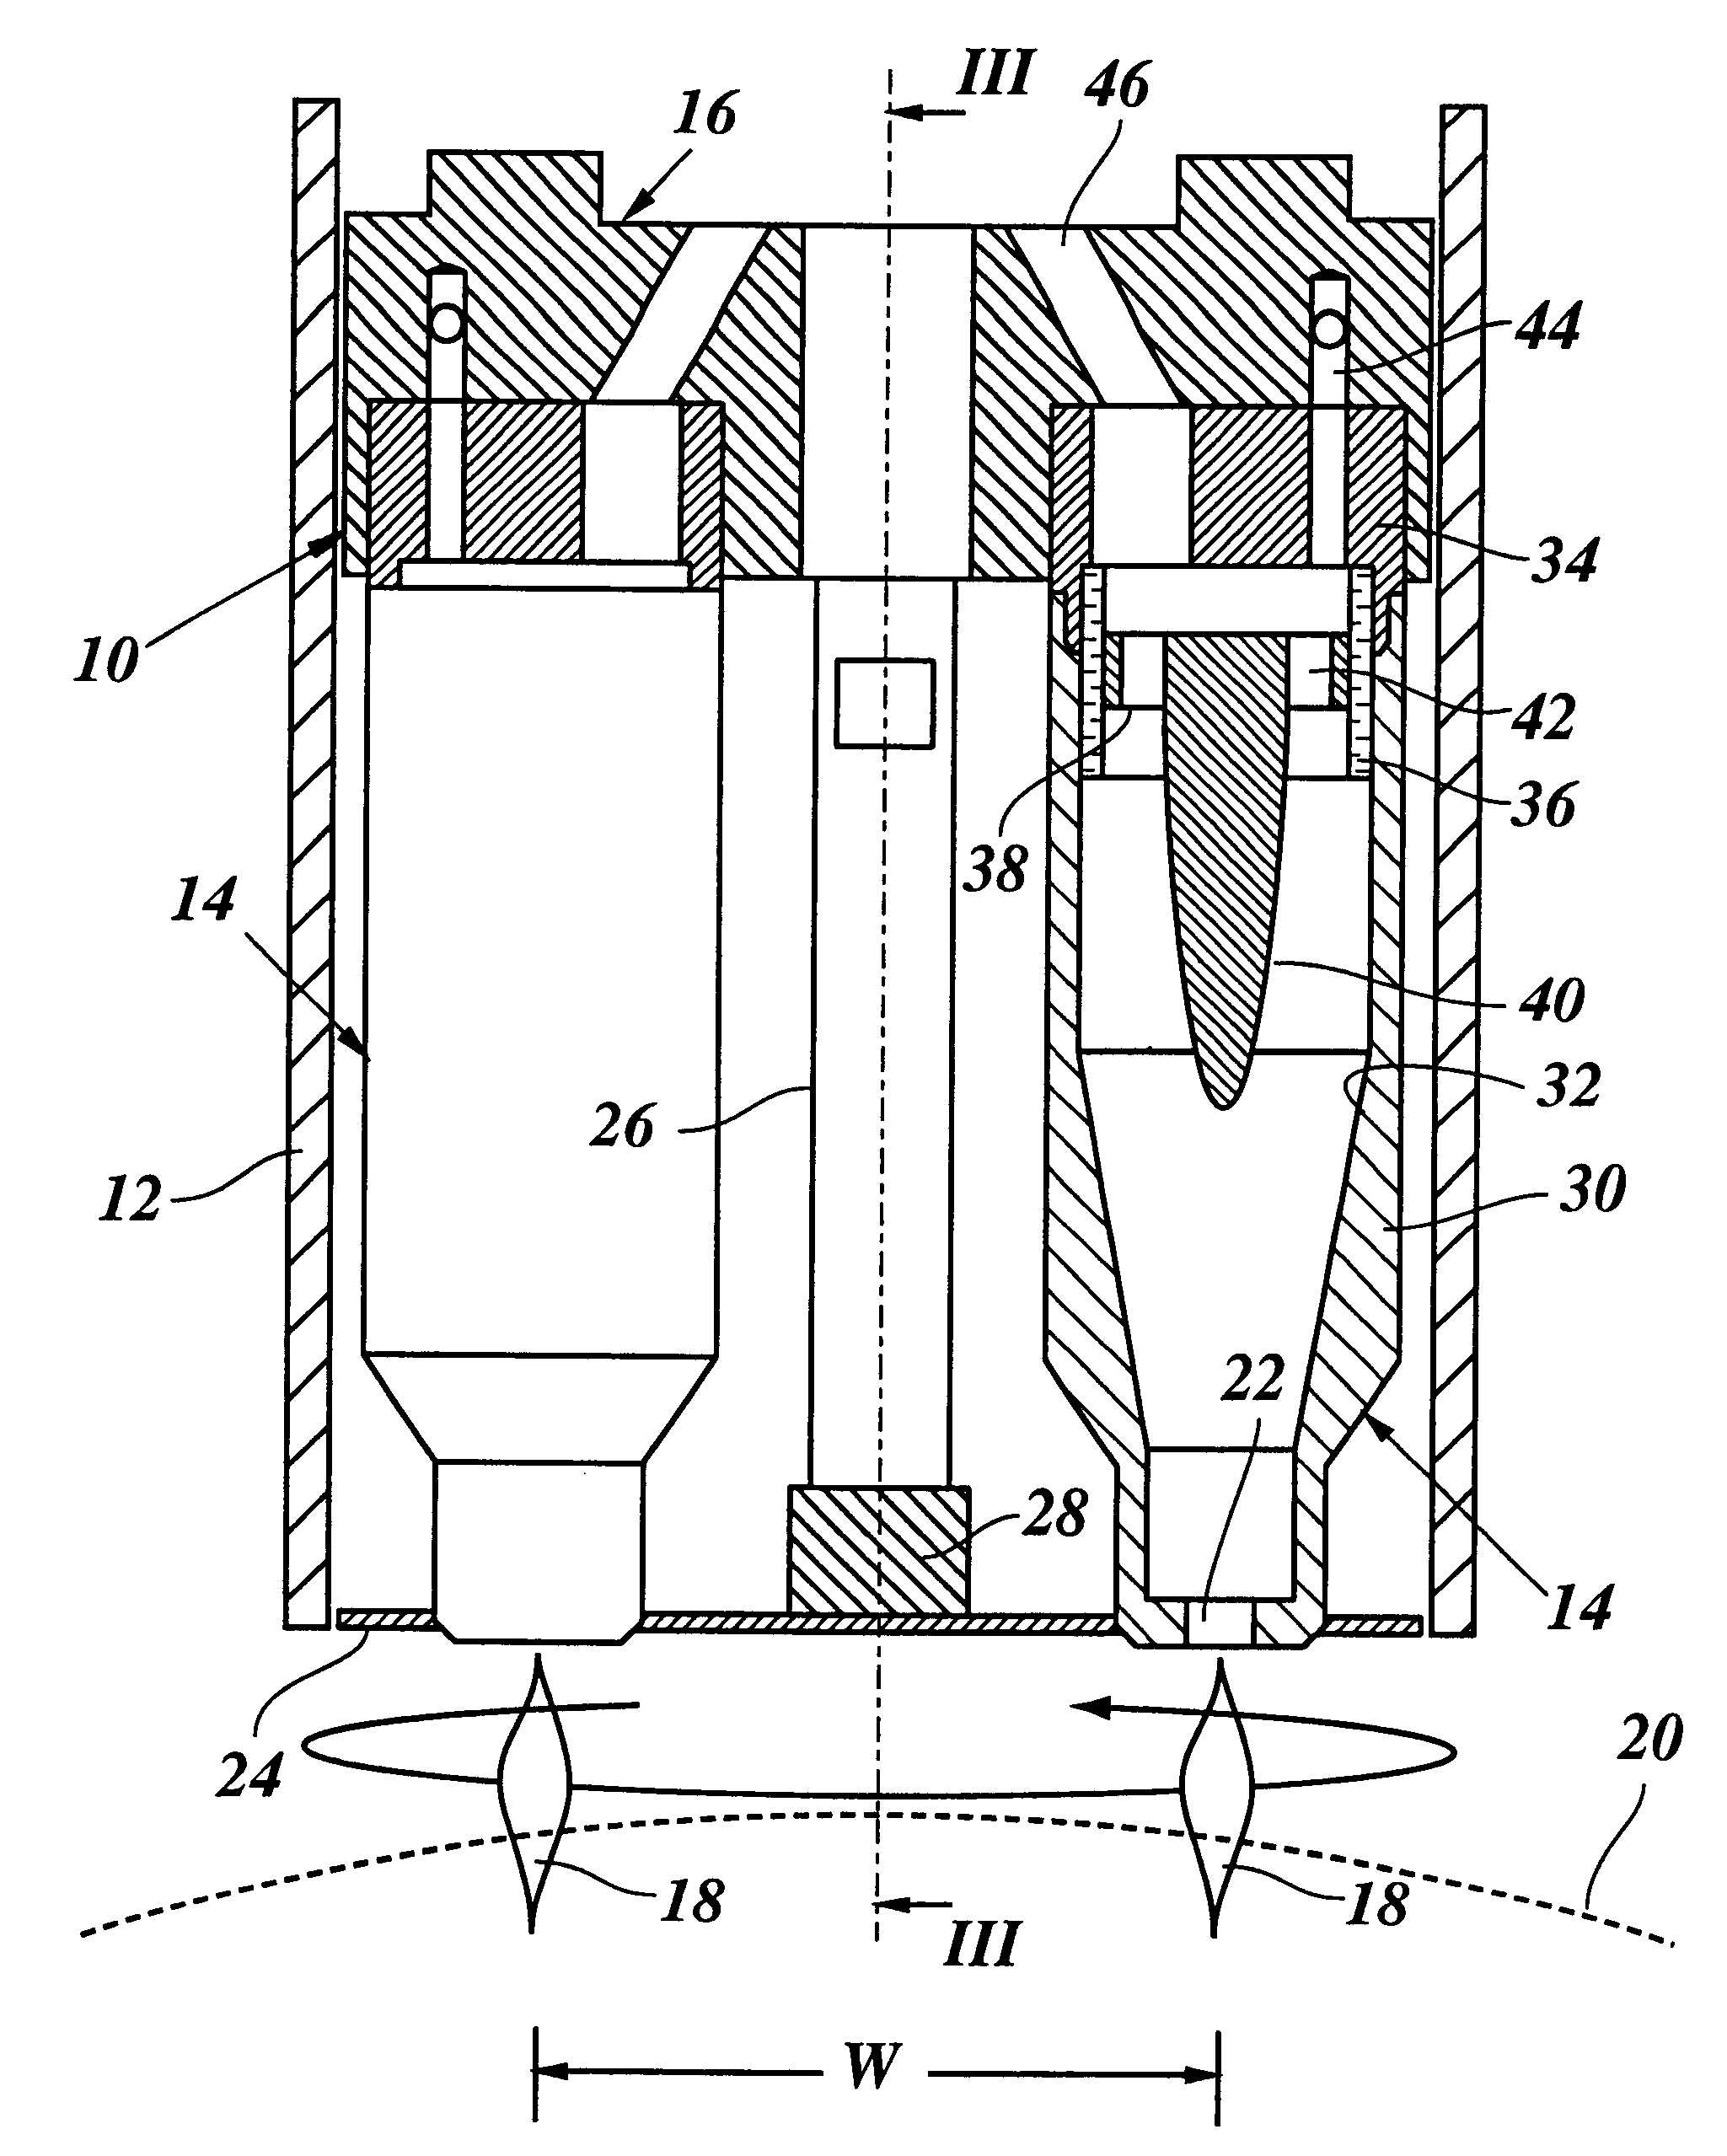 Plasma processing device for surfaces